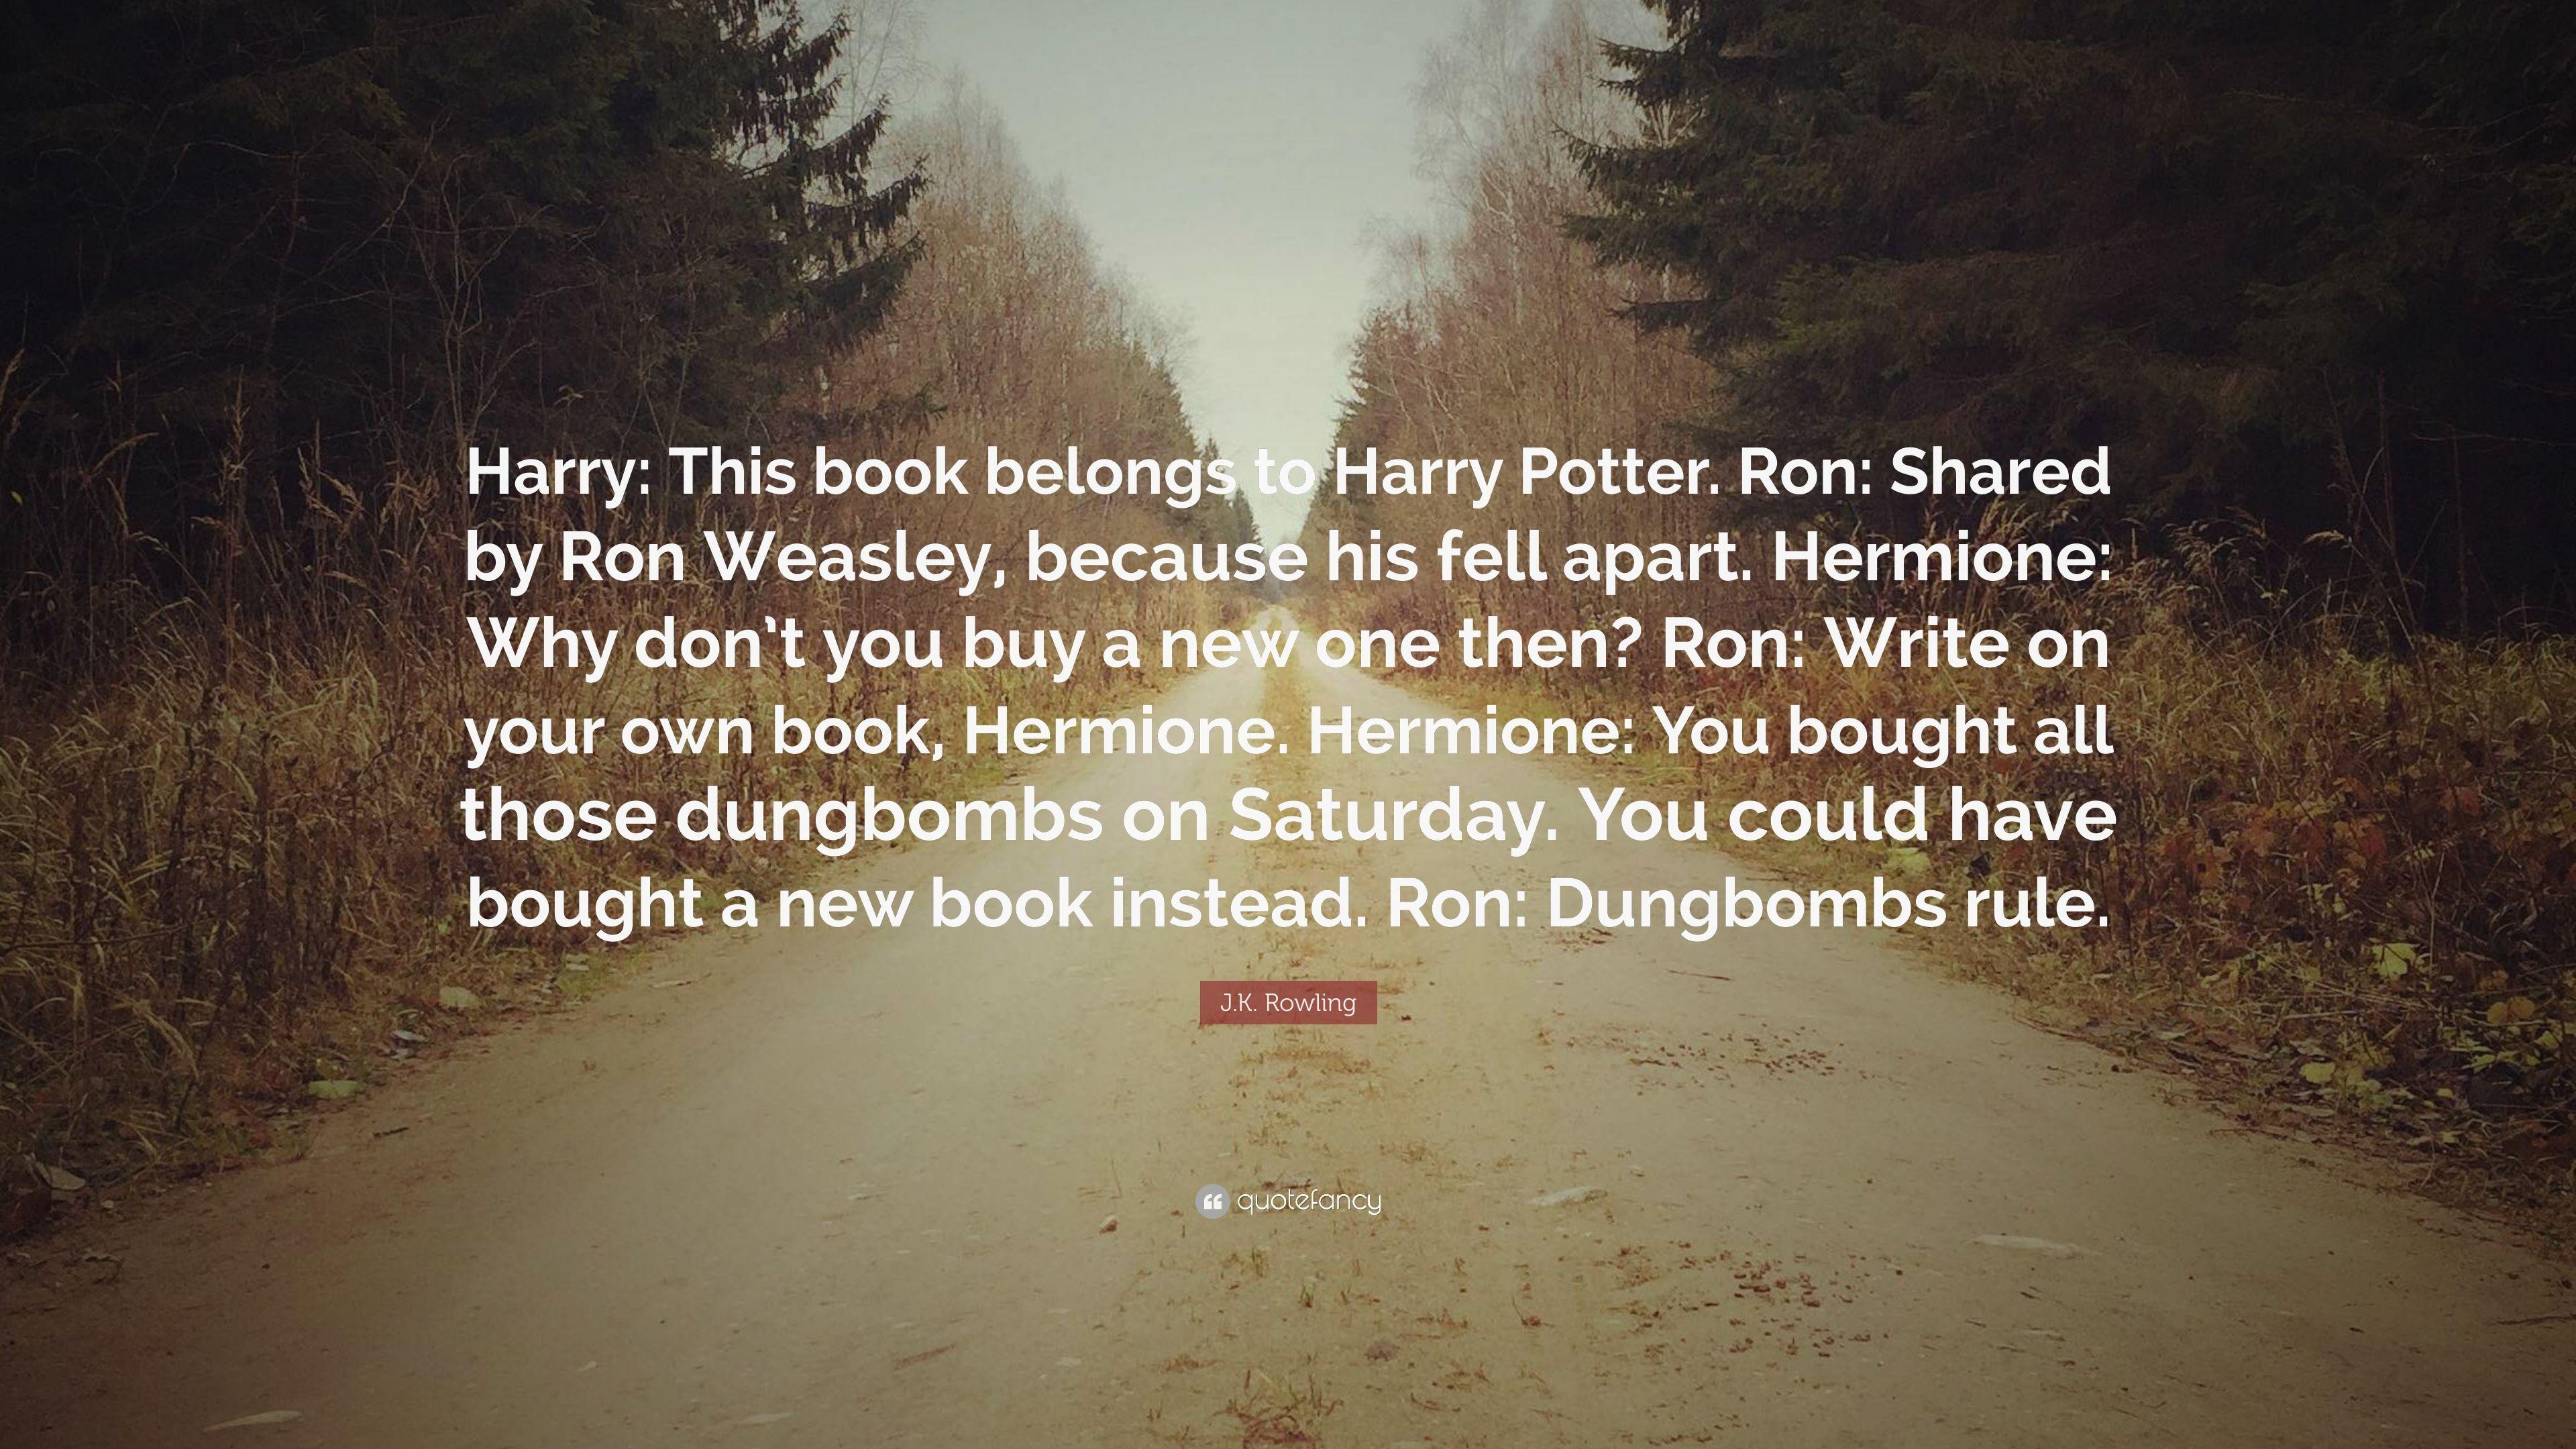 Harry Potter Quote Wallpaper J.k. Rowling Quote “Harry This Book